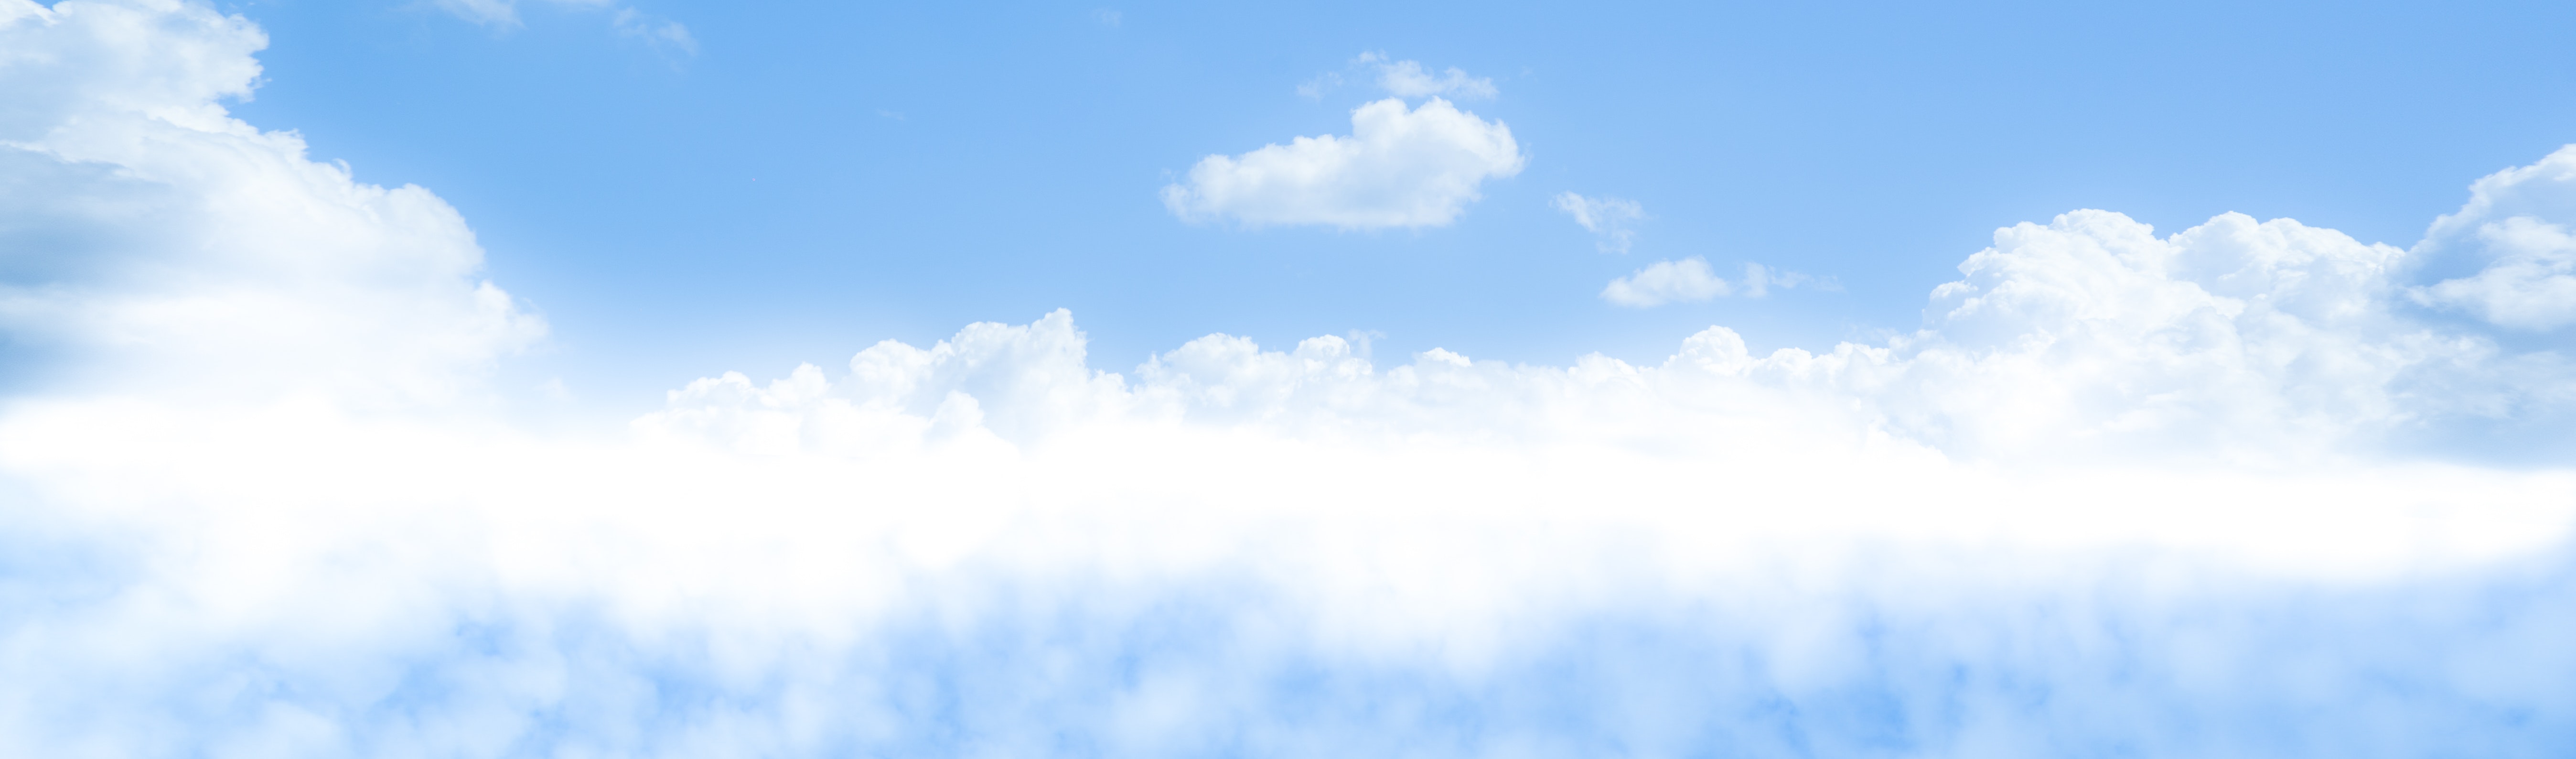 Free Photo Sky And Clouds Blue Clouds Gray Free Download Jooinn